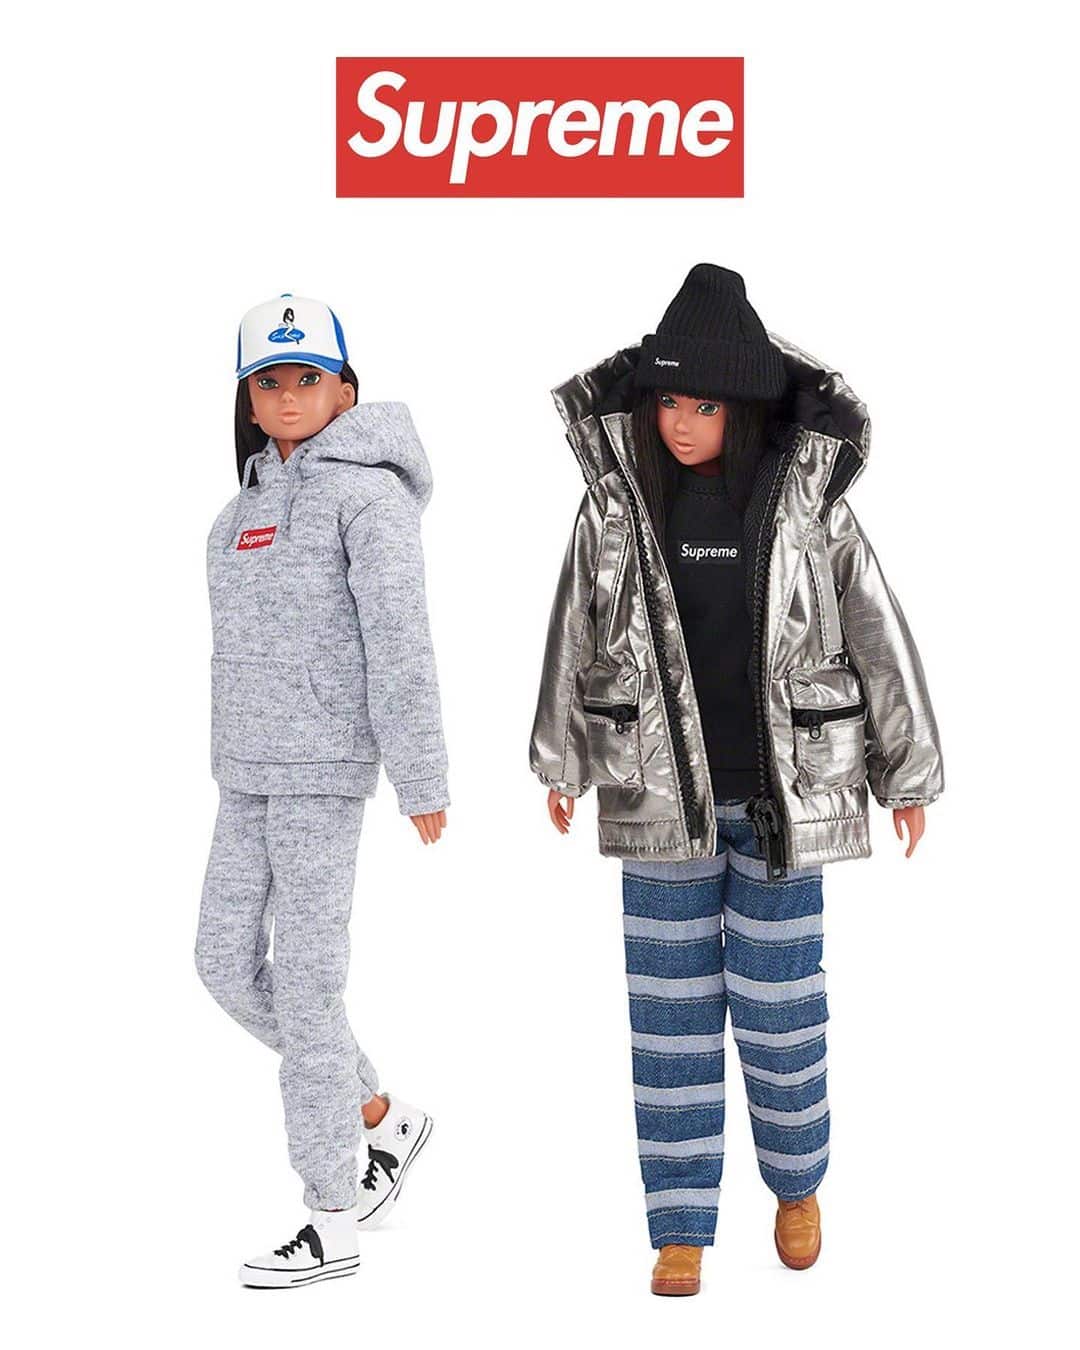 Supreme Fall/Winter 2022 Collection